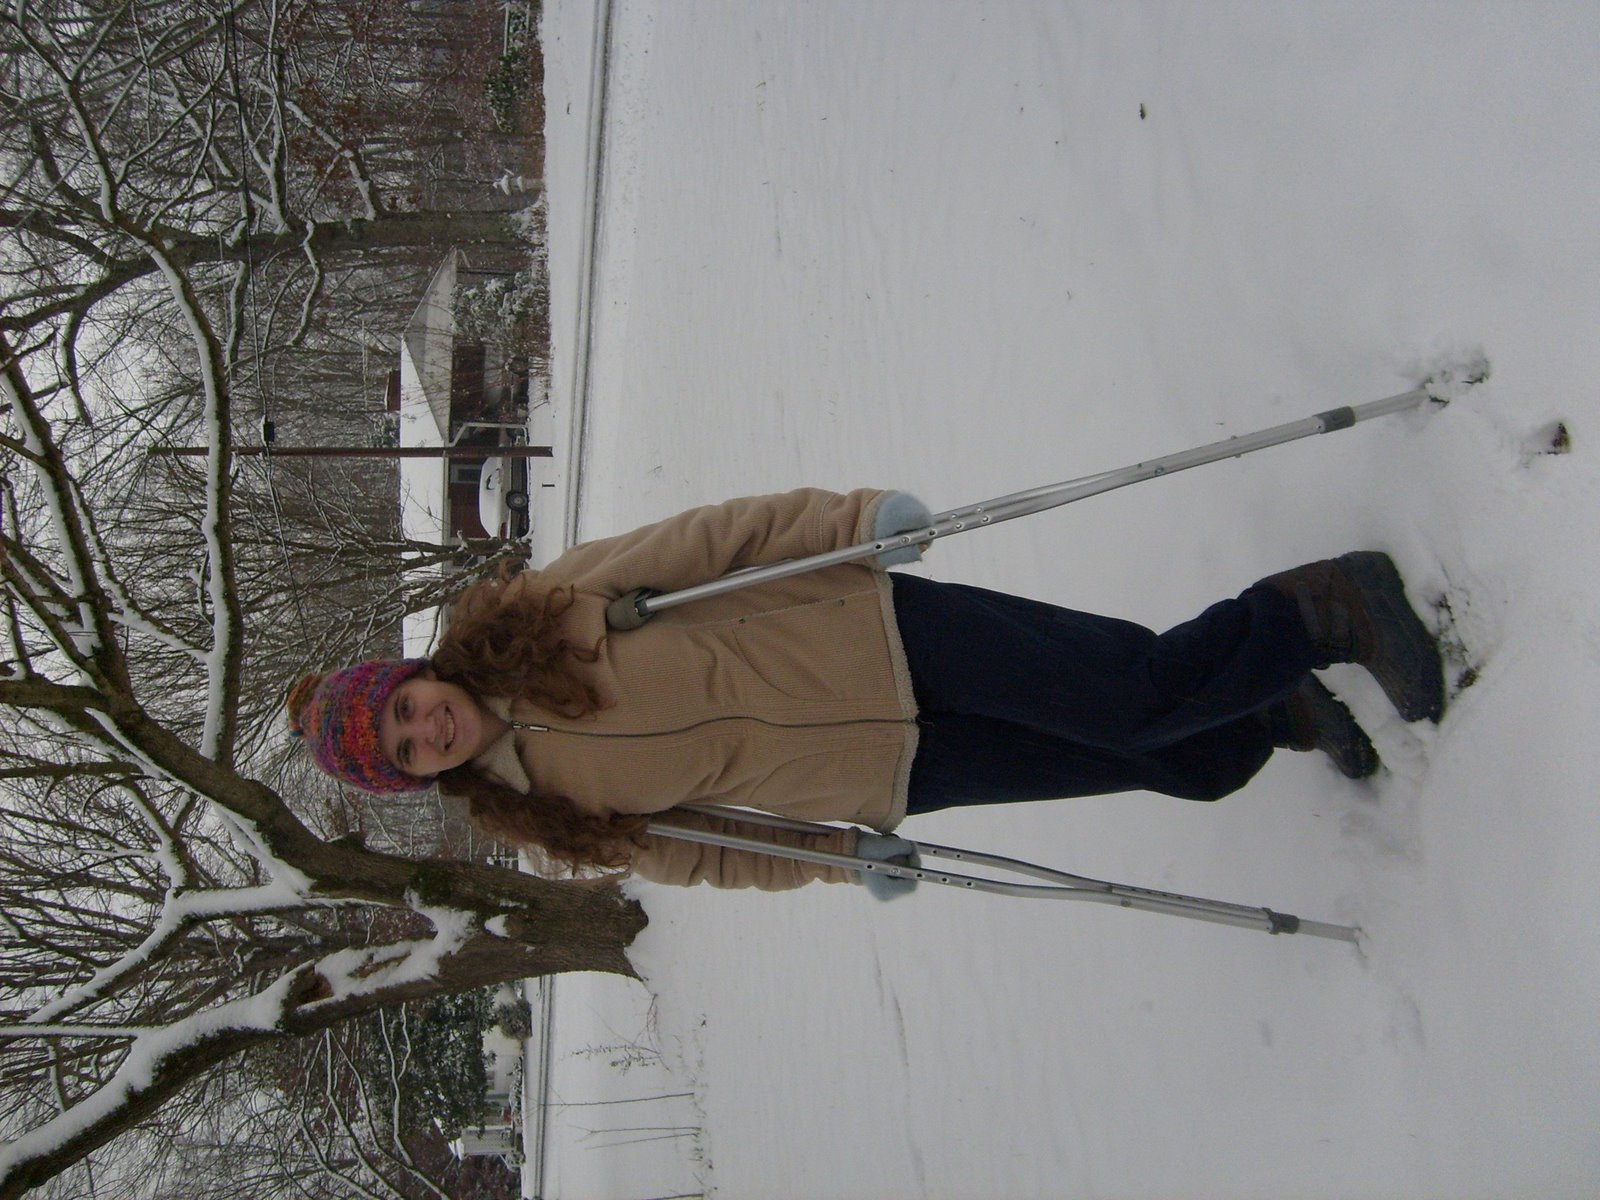 [in+the+snow+on+crutches.jpg]